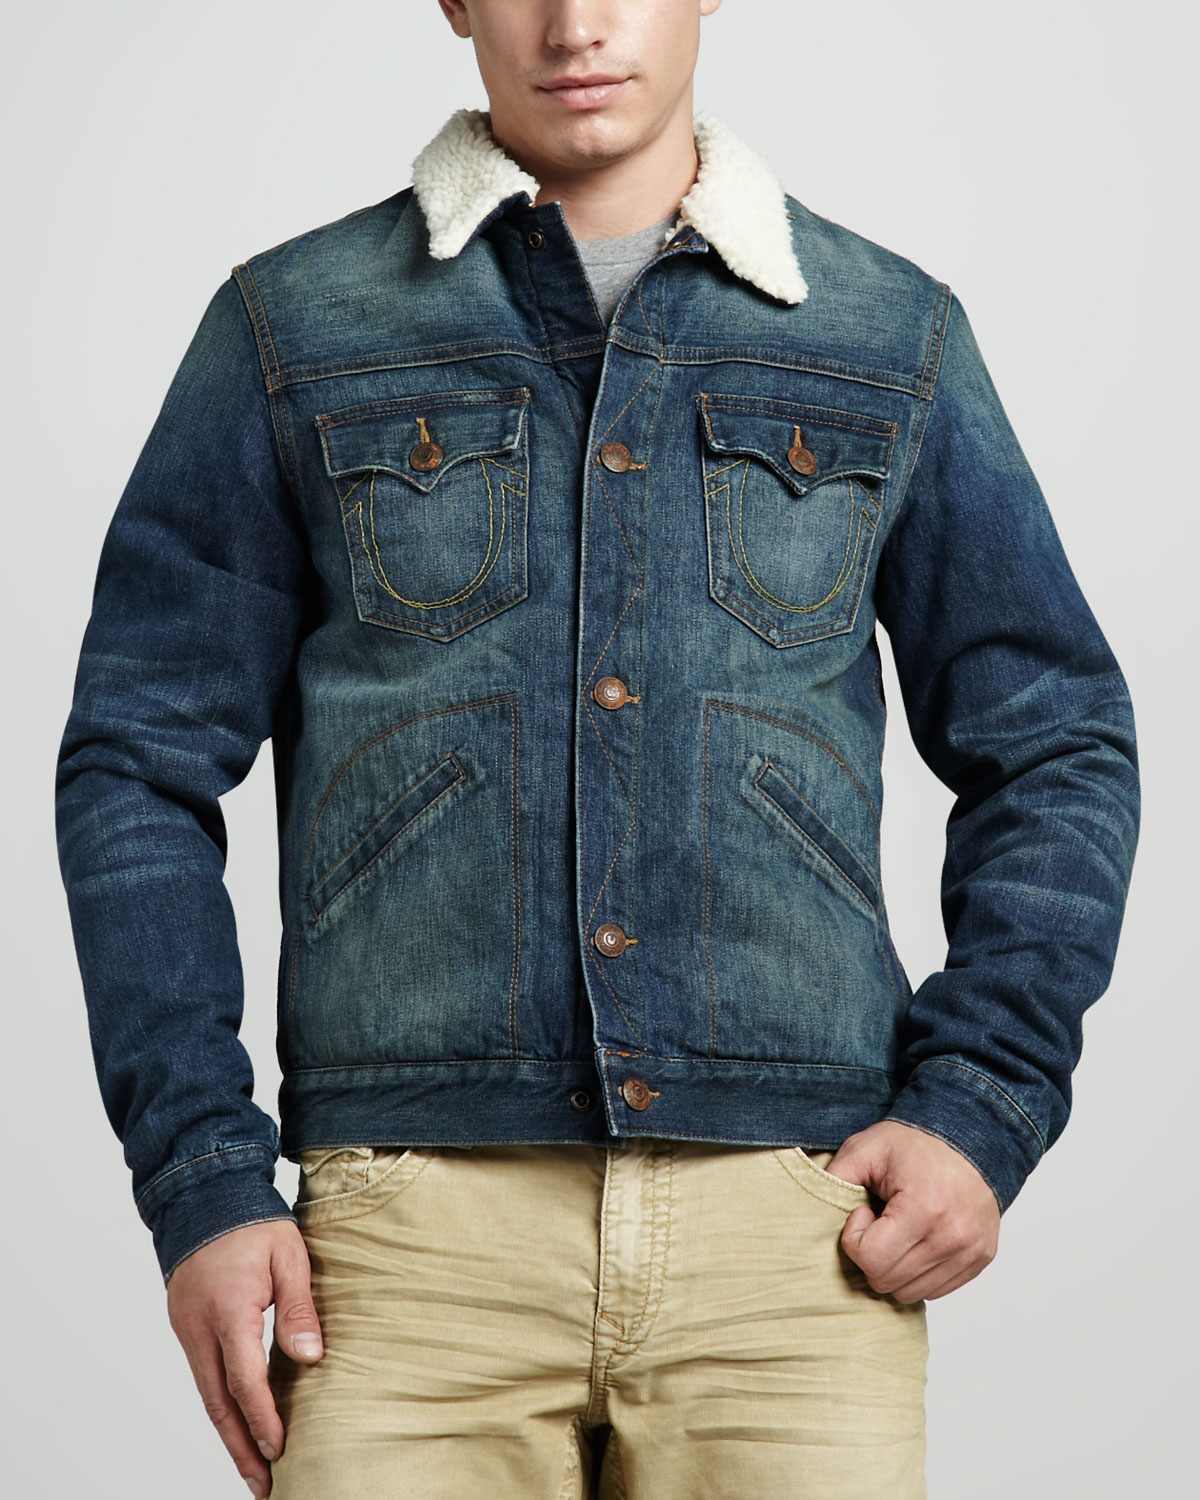 Lyst - True religion Daltry Denim Jacket with Sherpa Collar in Blue for Men